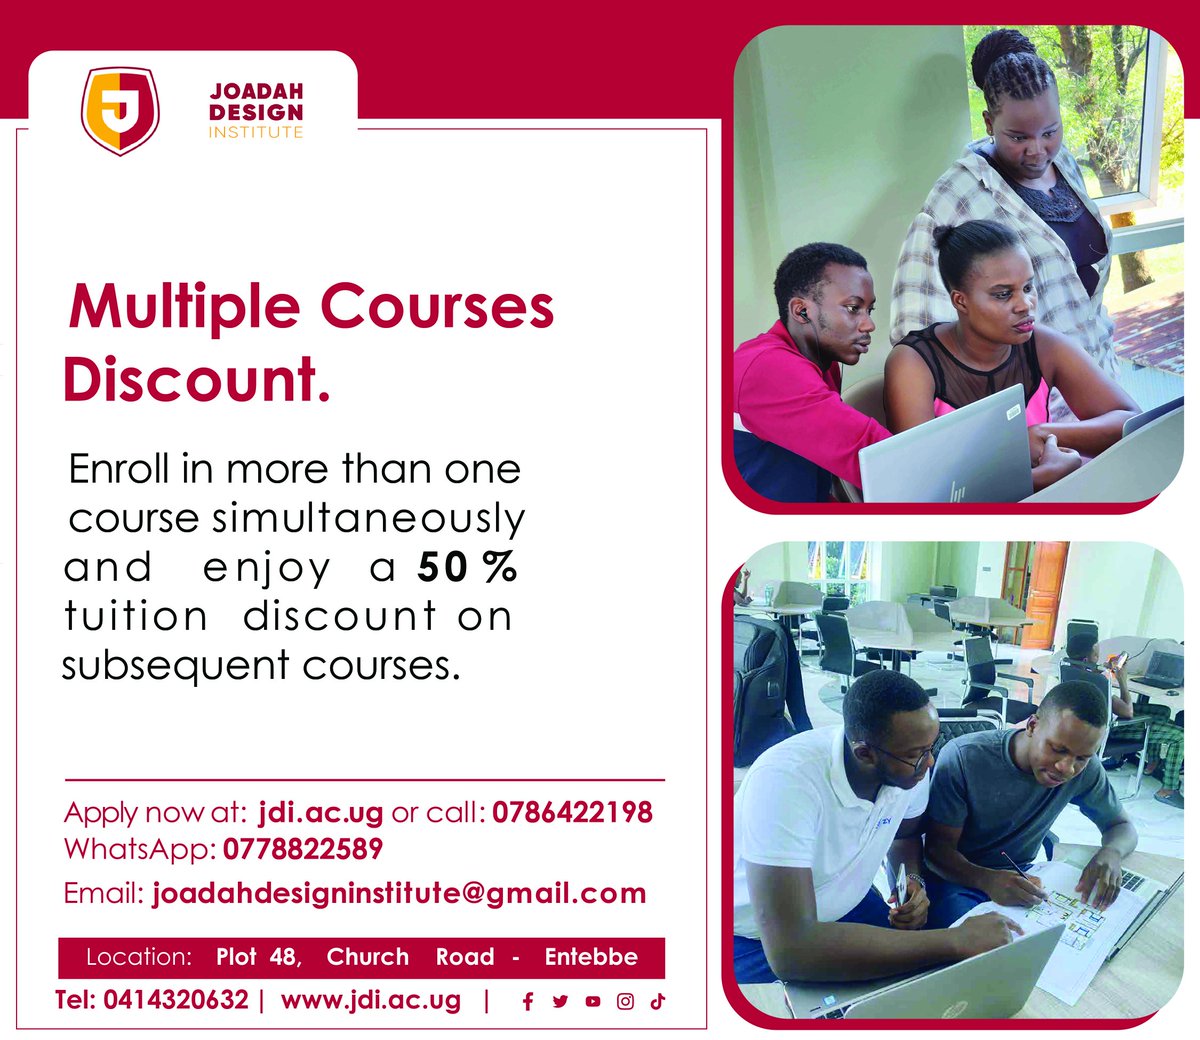 At Joadah Design Institute when you enroll for multiple courses simultaneously, we offer you a 50% tuition discount on subsequent courses.